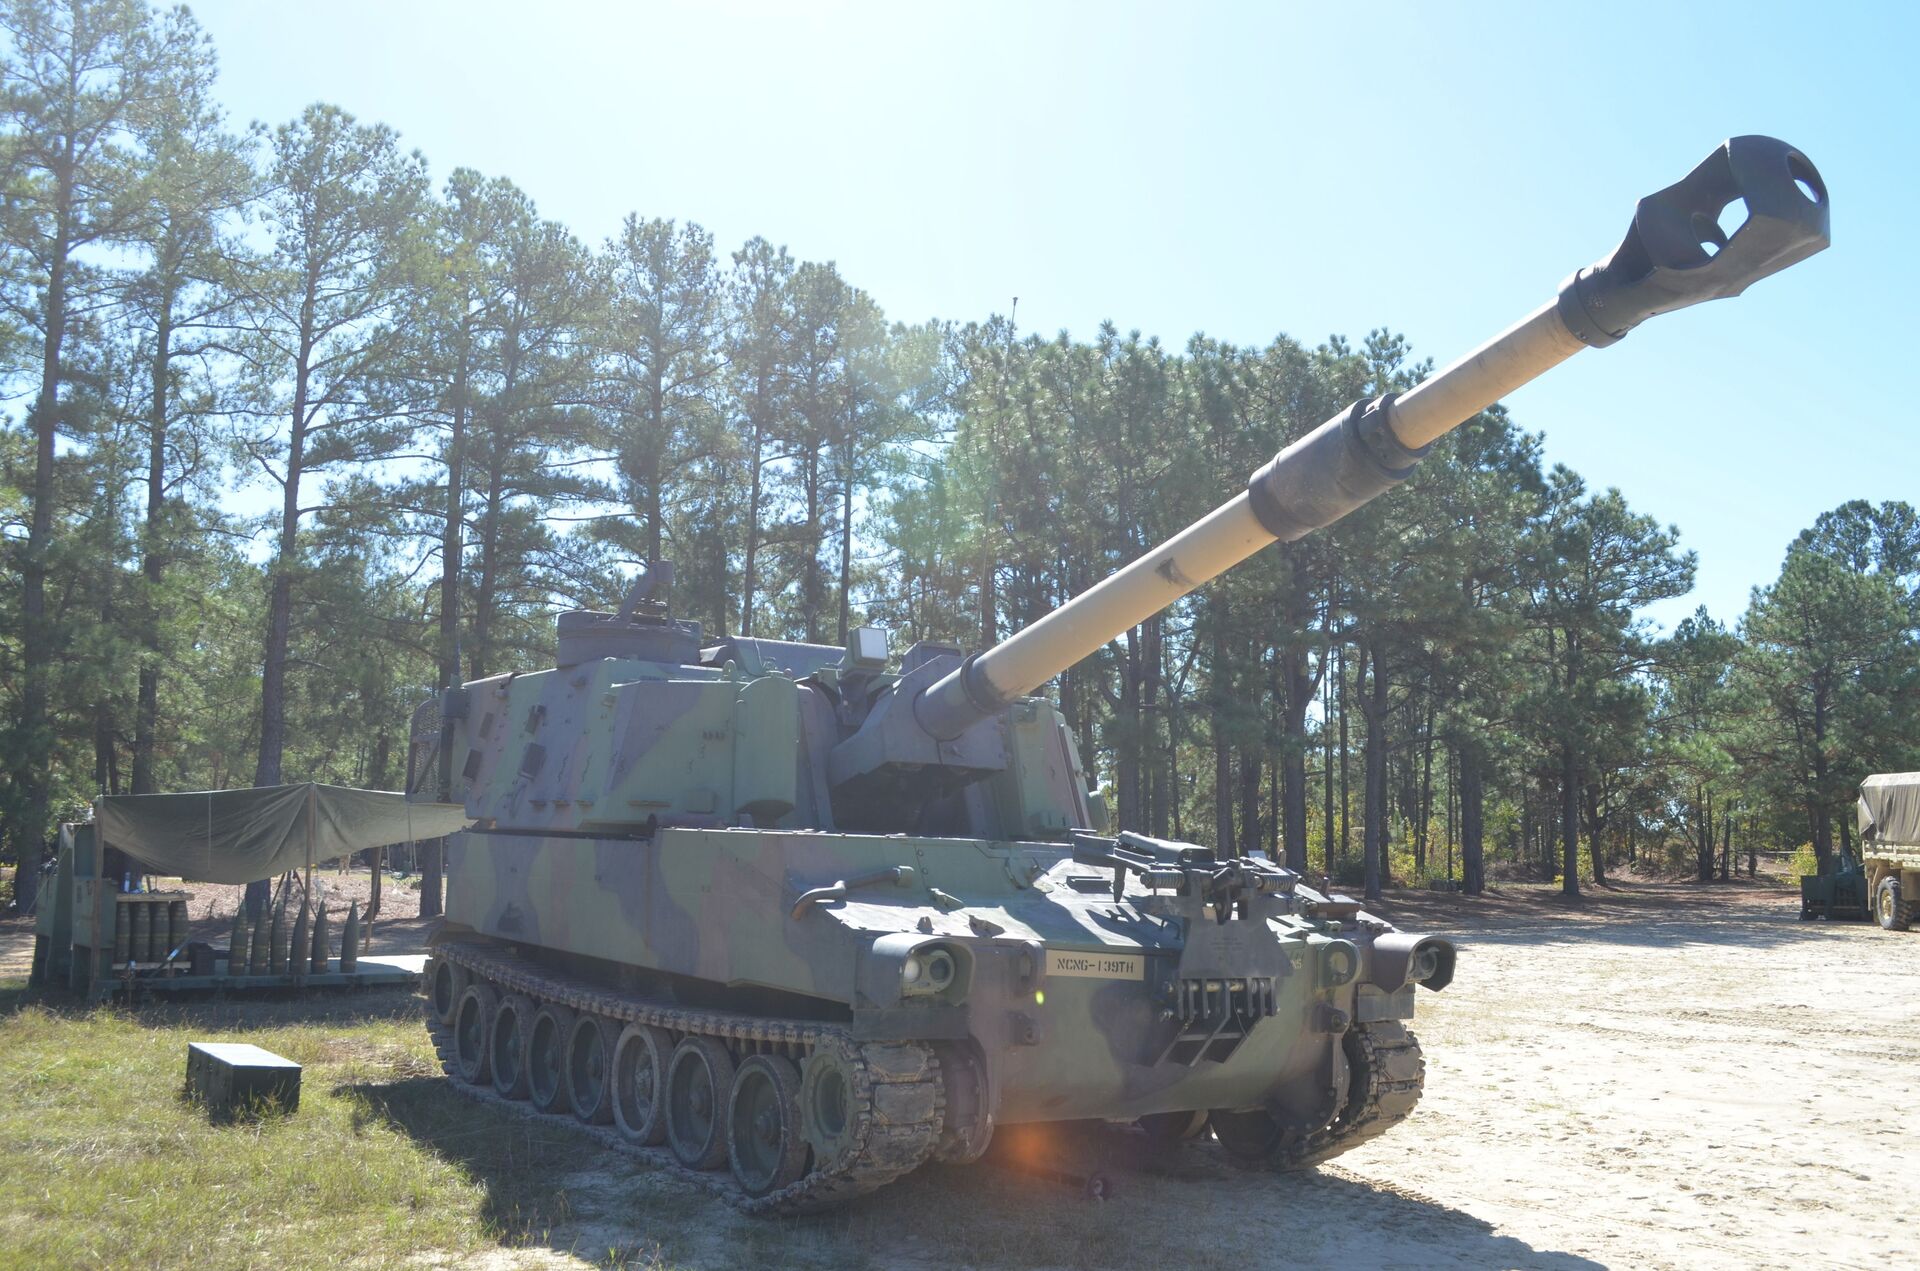 The M109 Paladin Self-Propelled Howitzer standing ready deep in the southern training areas at Fort Bragg. Nine National Guard troops from North and South Carolina, Florida, Georgia, Mississippi, Illinois and New Jersey are attending the 13 Bravo artillery military occupational specialty (MOS) reclassification course and will learn how to be a crew member on the three main “cannon” artillery weapons systems in the U.S. Army: The M119A3 105mm light towed howitzer, M777A2 155mm medium towed howitzer and the M109A6 Paladin 155mm self-propelled howitzer. Over the course of two days in the field, students will fire hundreds of rounds from all three weapons. - Sputnik International, 1920, 07.09.2021